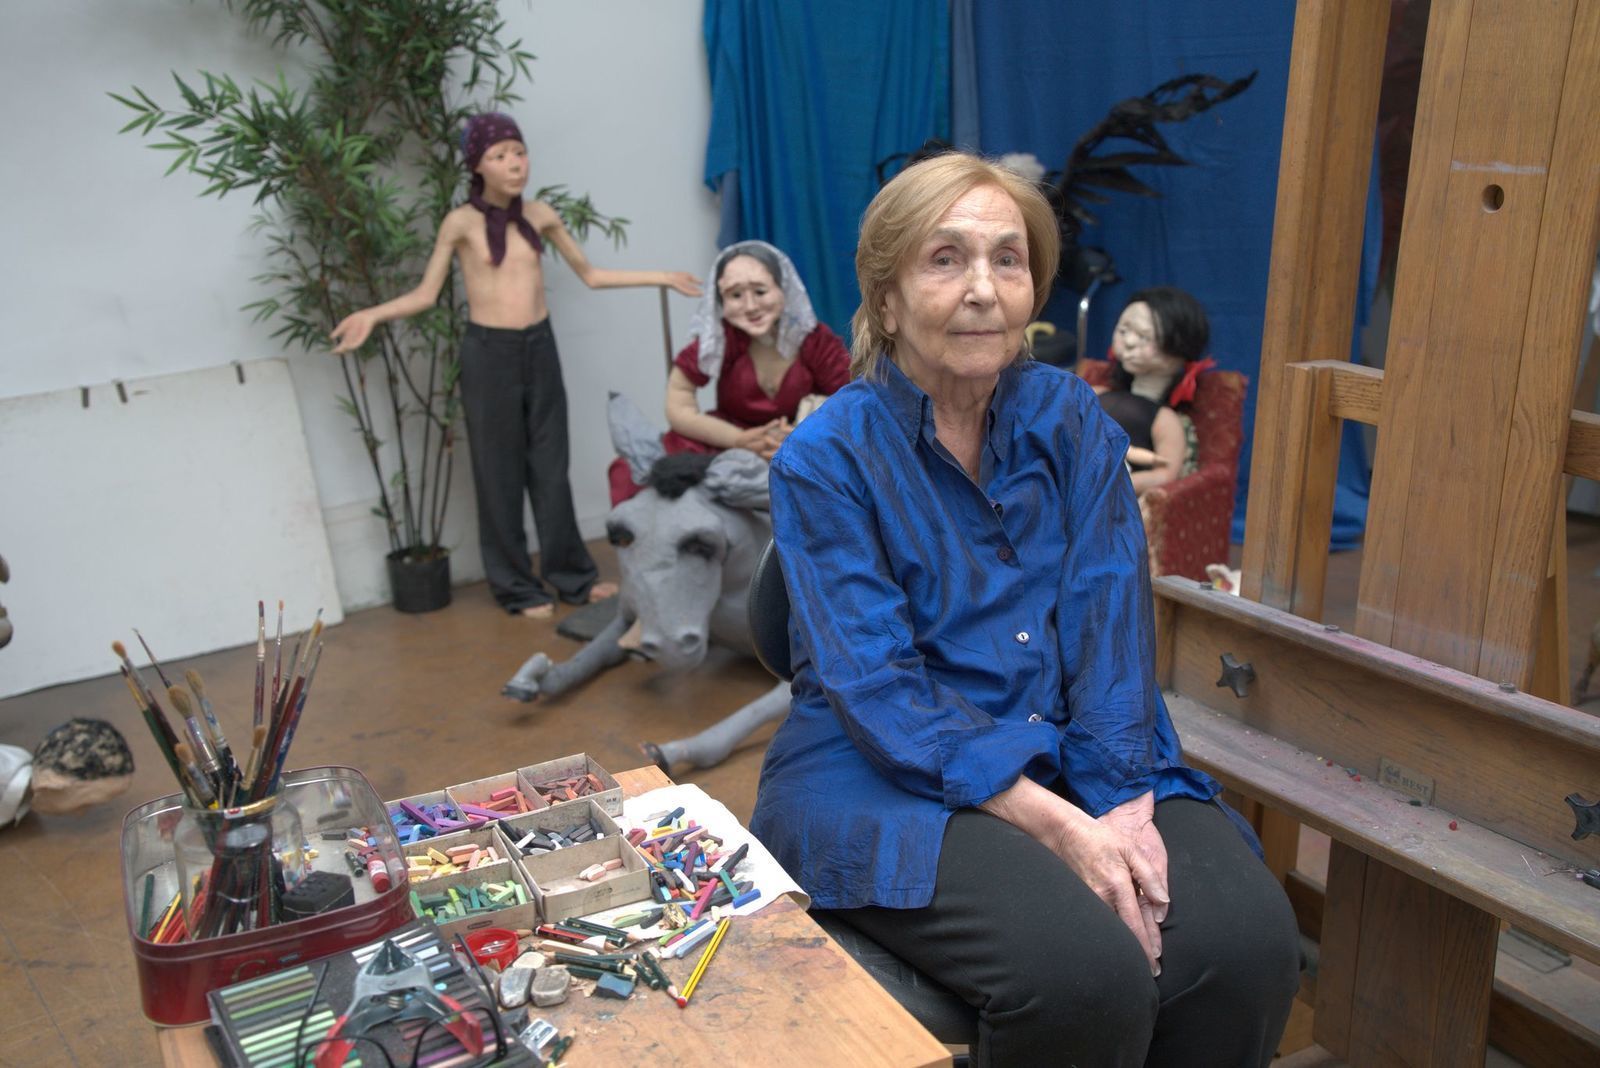 2: Paula Rego: One of the greatest figurative artists of her generation, who places women at the centre of her work